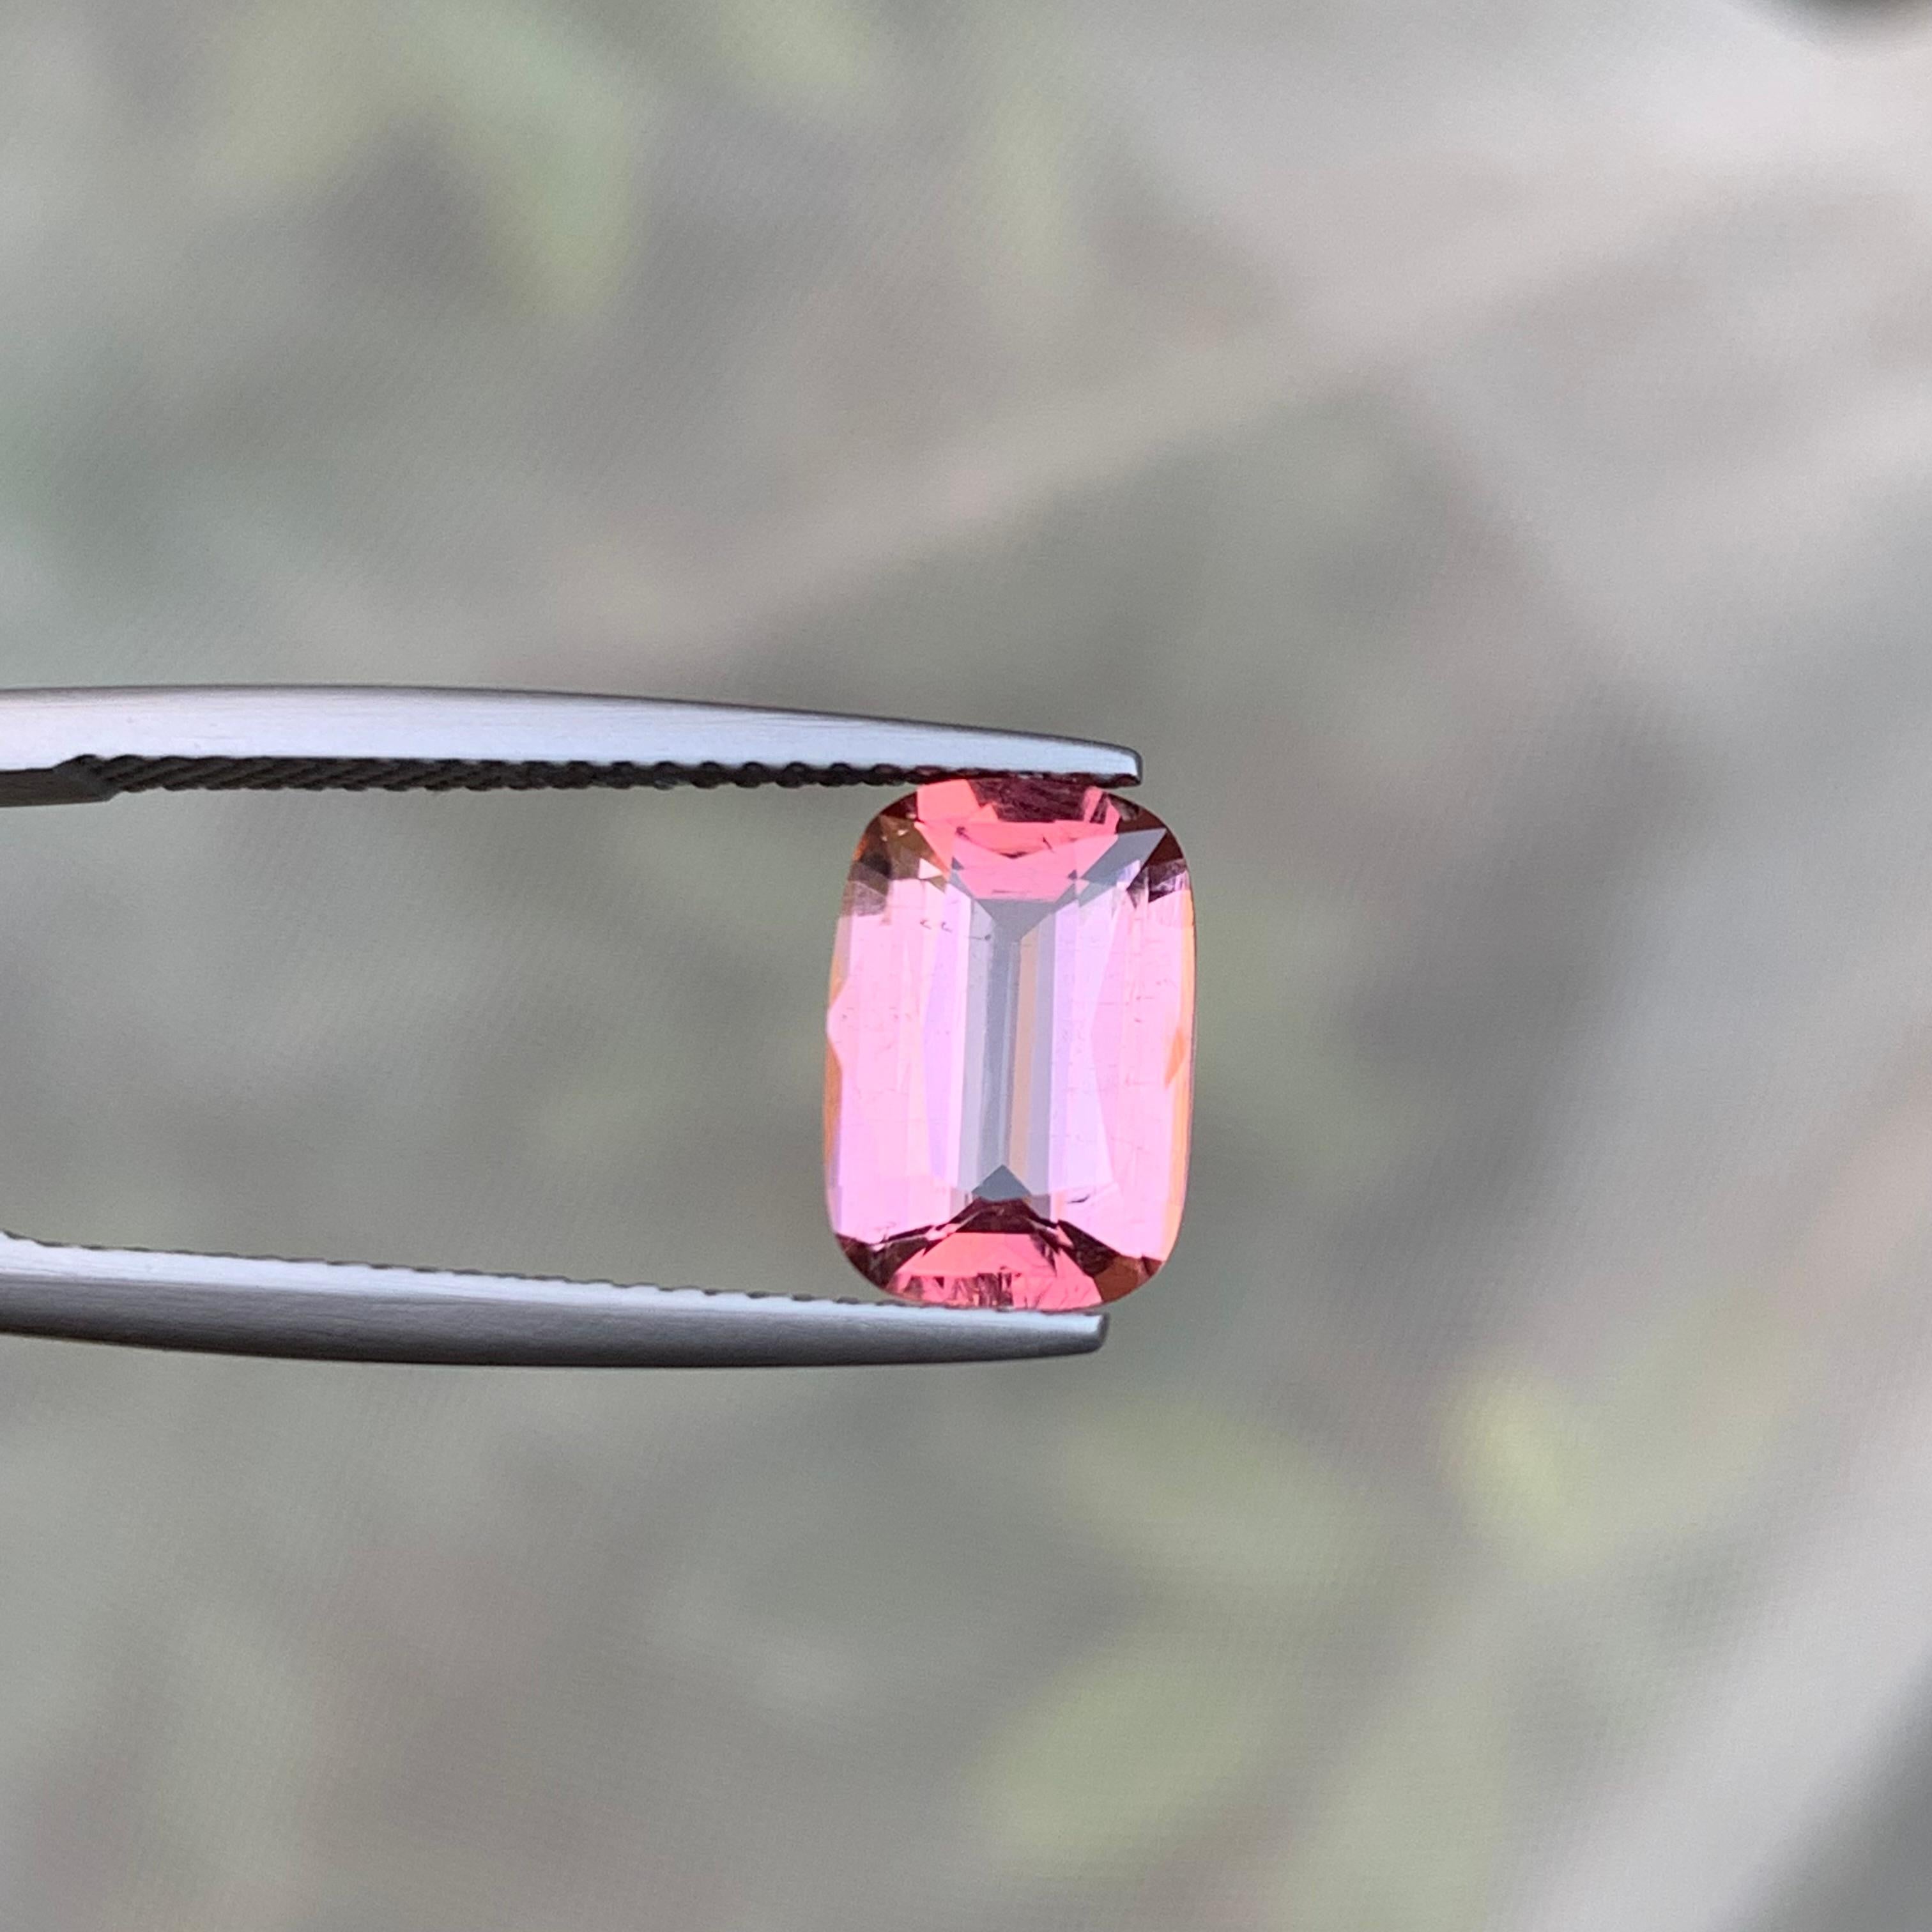 Rare Pink Natural Tourmaline Loose Gemstone, 2.30 Ct Cushion Cut Ideal for Ring For Sale 7